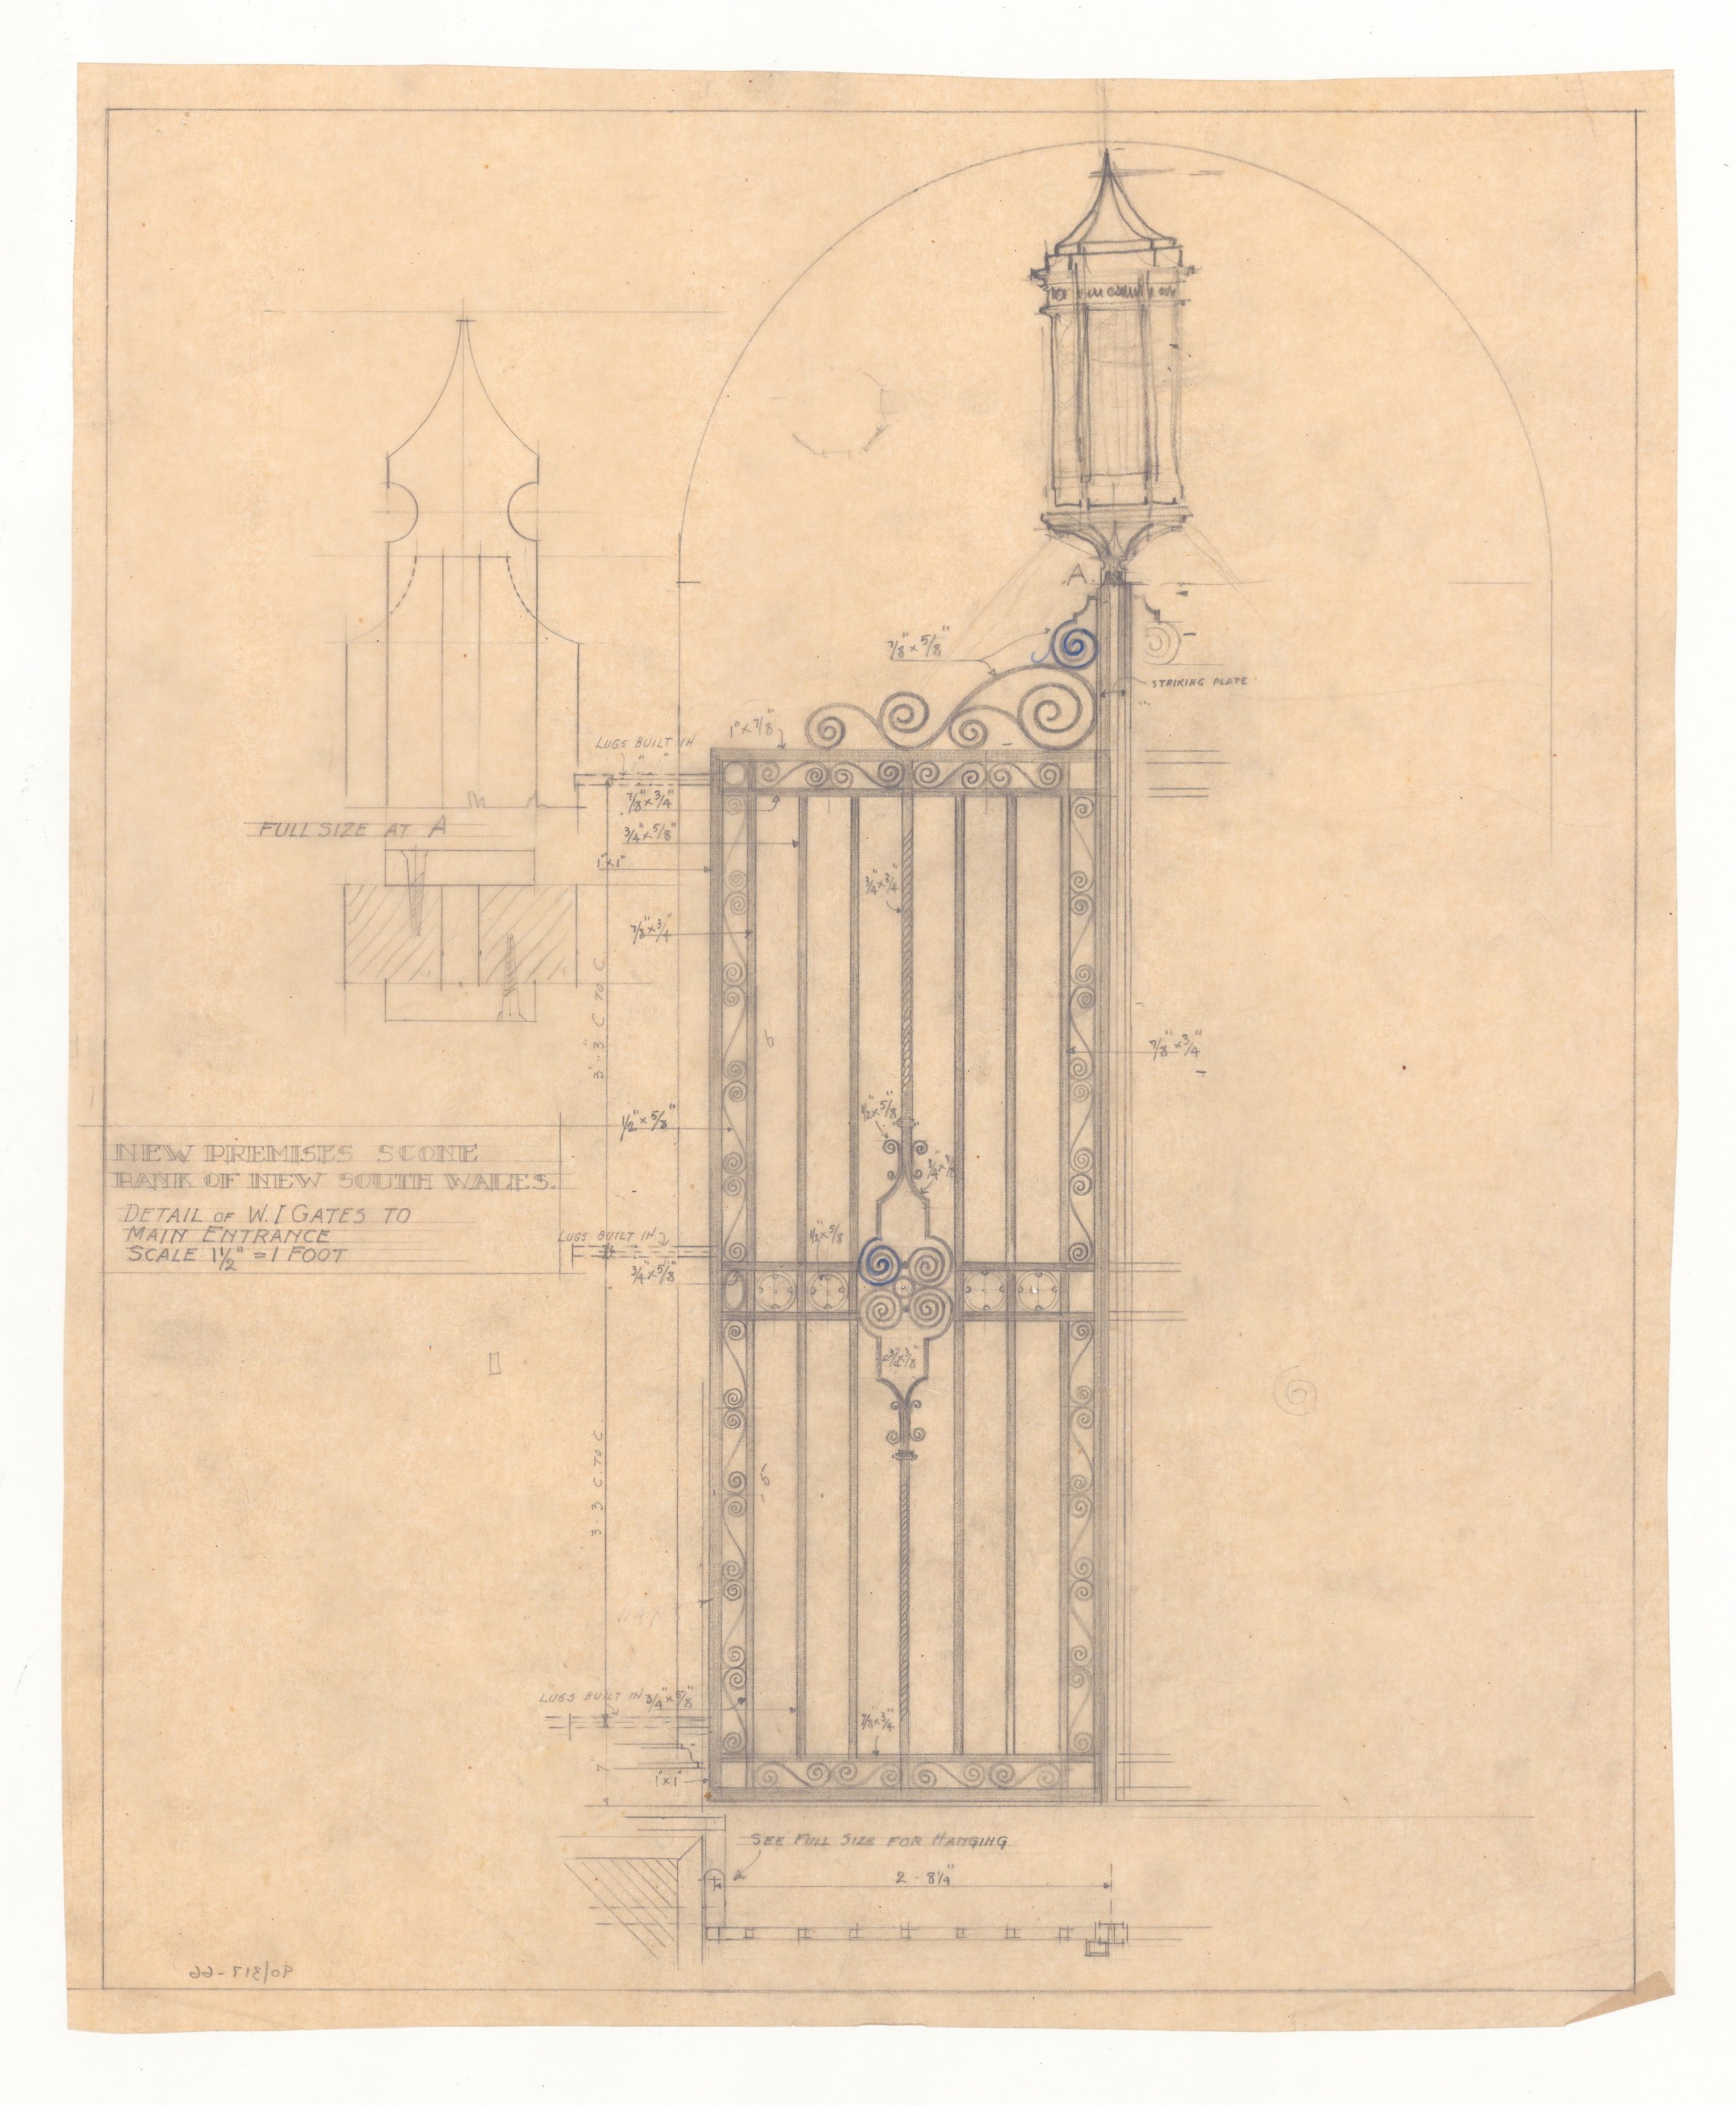 Architectural drawing of Bank of New South Wales Scone